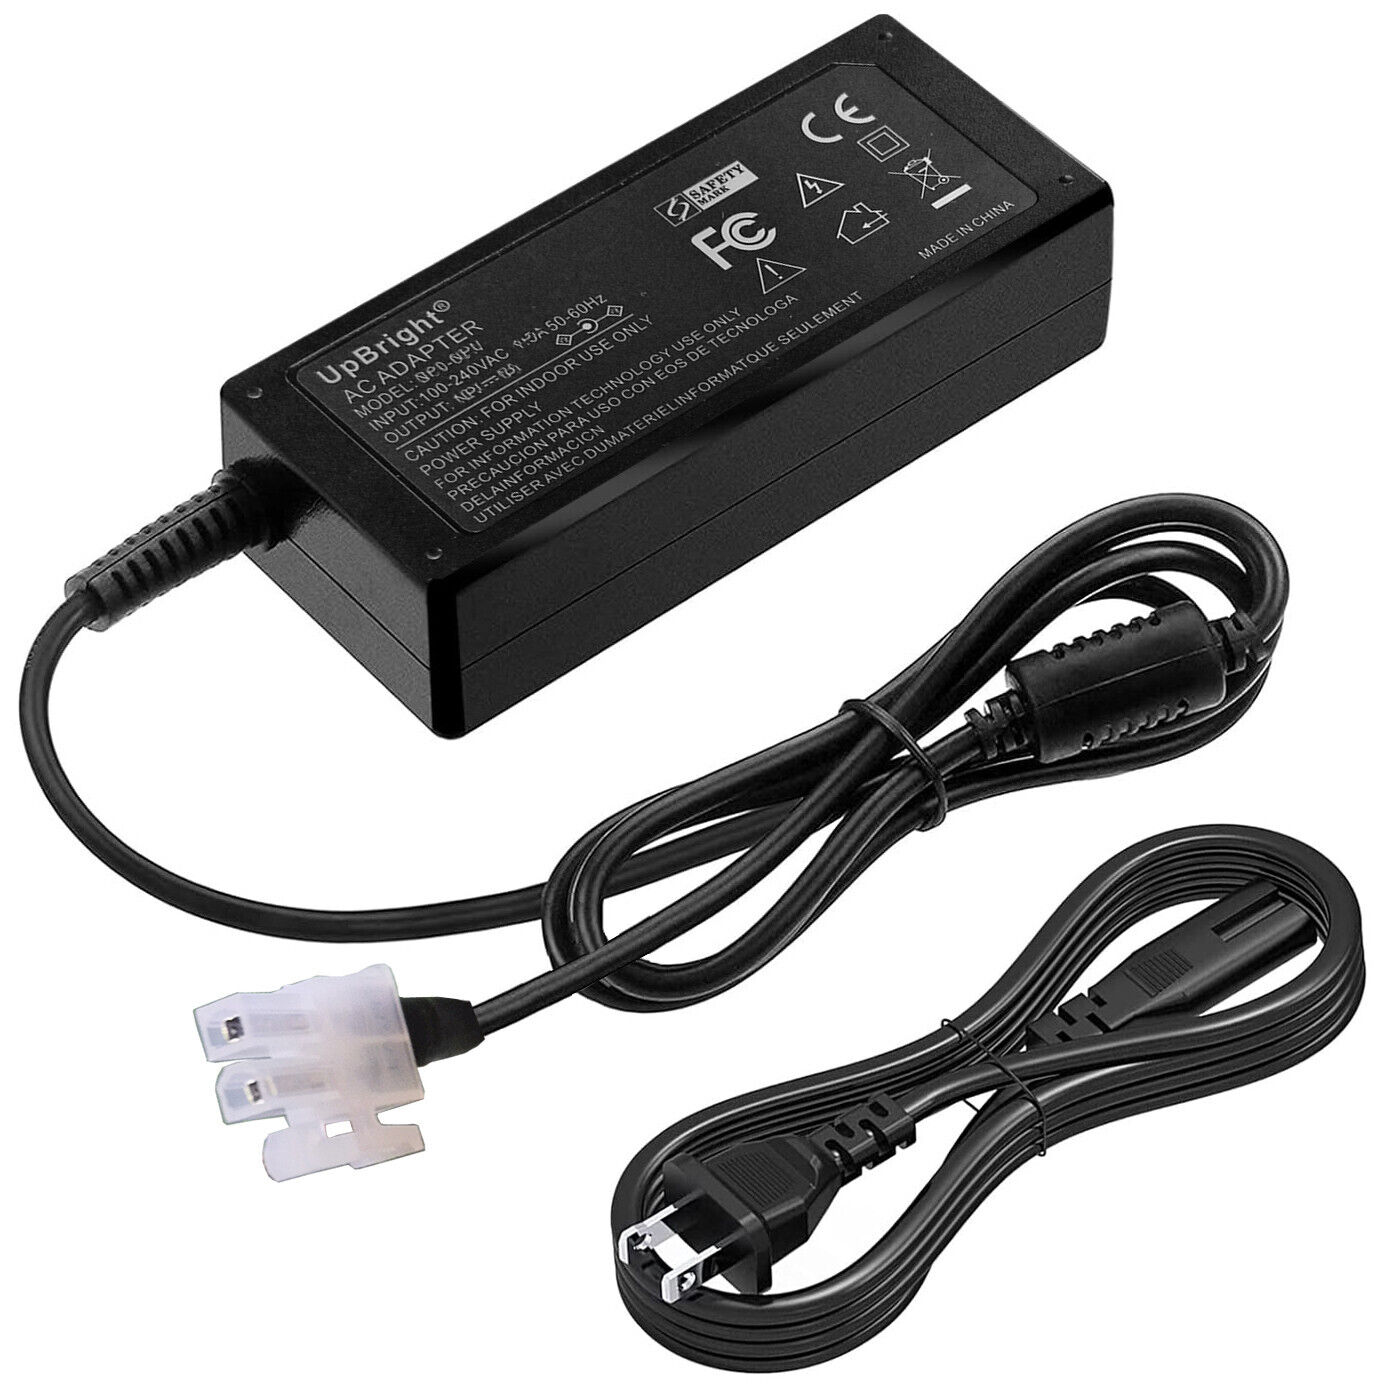 24V AC Adapter For Linak ASW0551-24020002A 13600039 SMPS002 Adjustable Bed Power